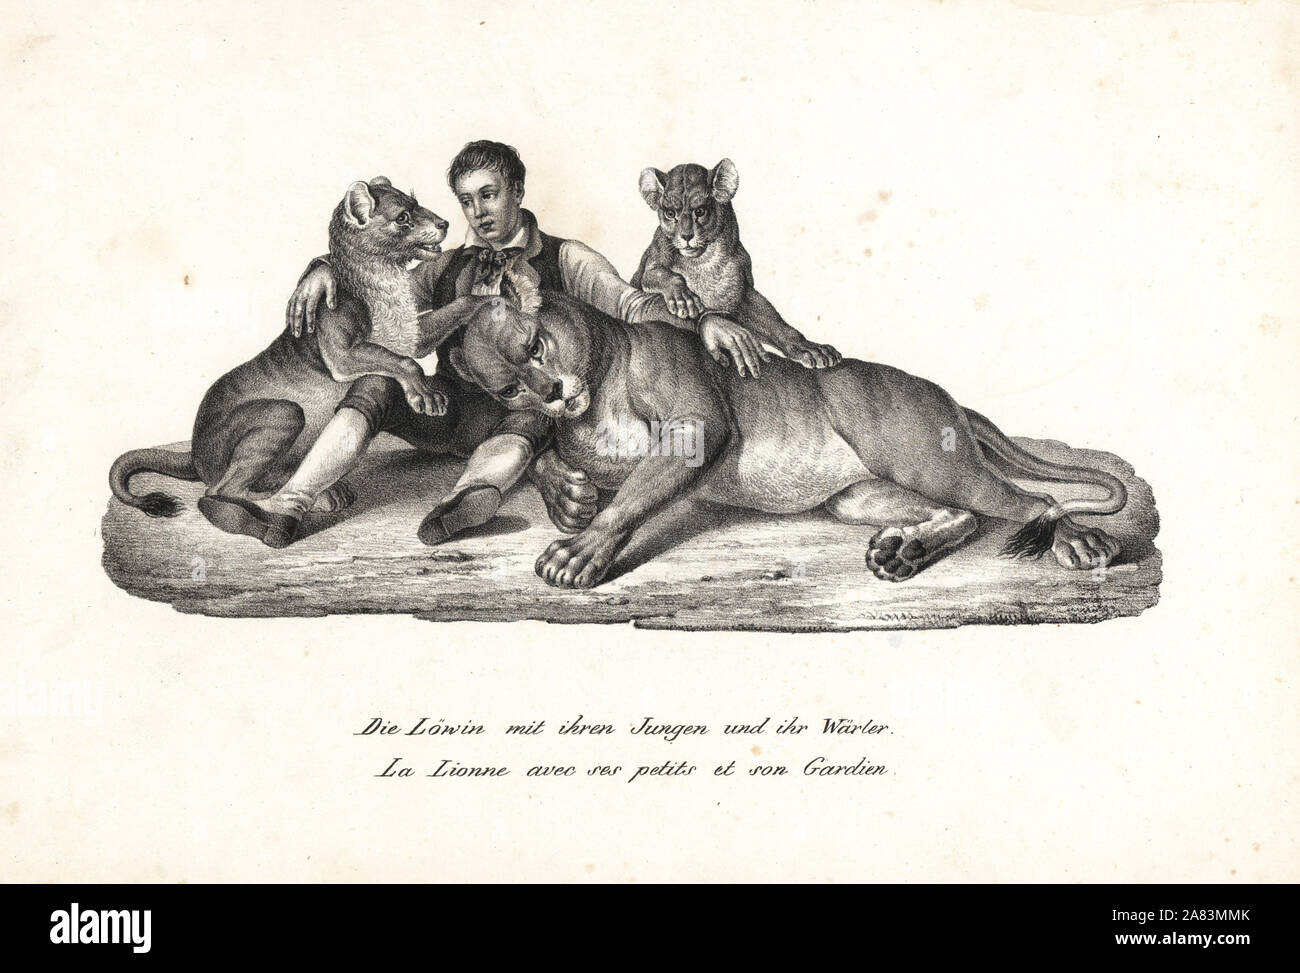 Lioness and cubs with trainer, Panthera leo. Lithograph by Karl Joseph Brodtmann from Heinrich Rudolf Schinz's Illustrated Natural History of Men and Animals, 1836. Stock Photo